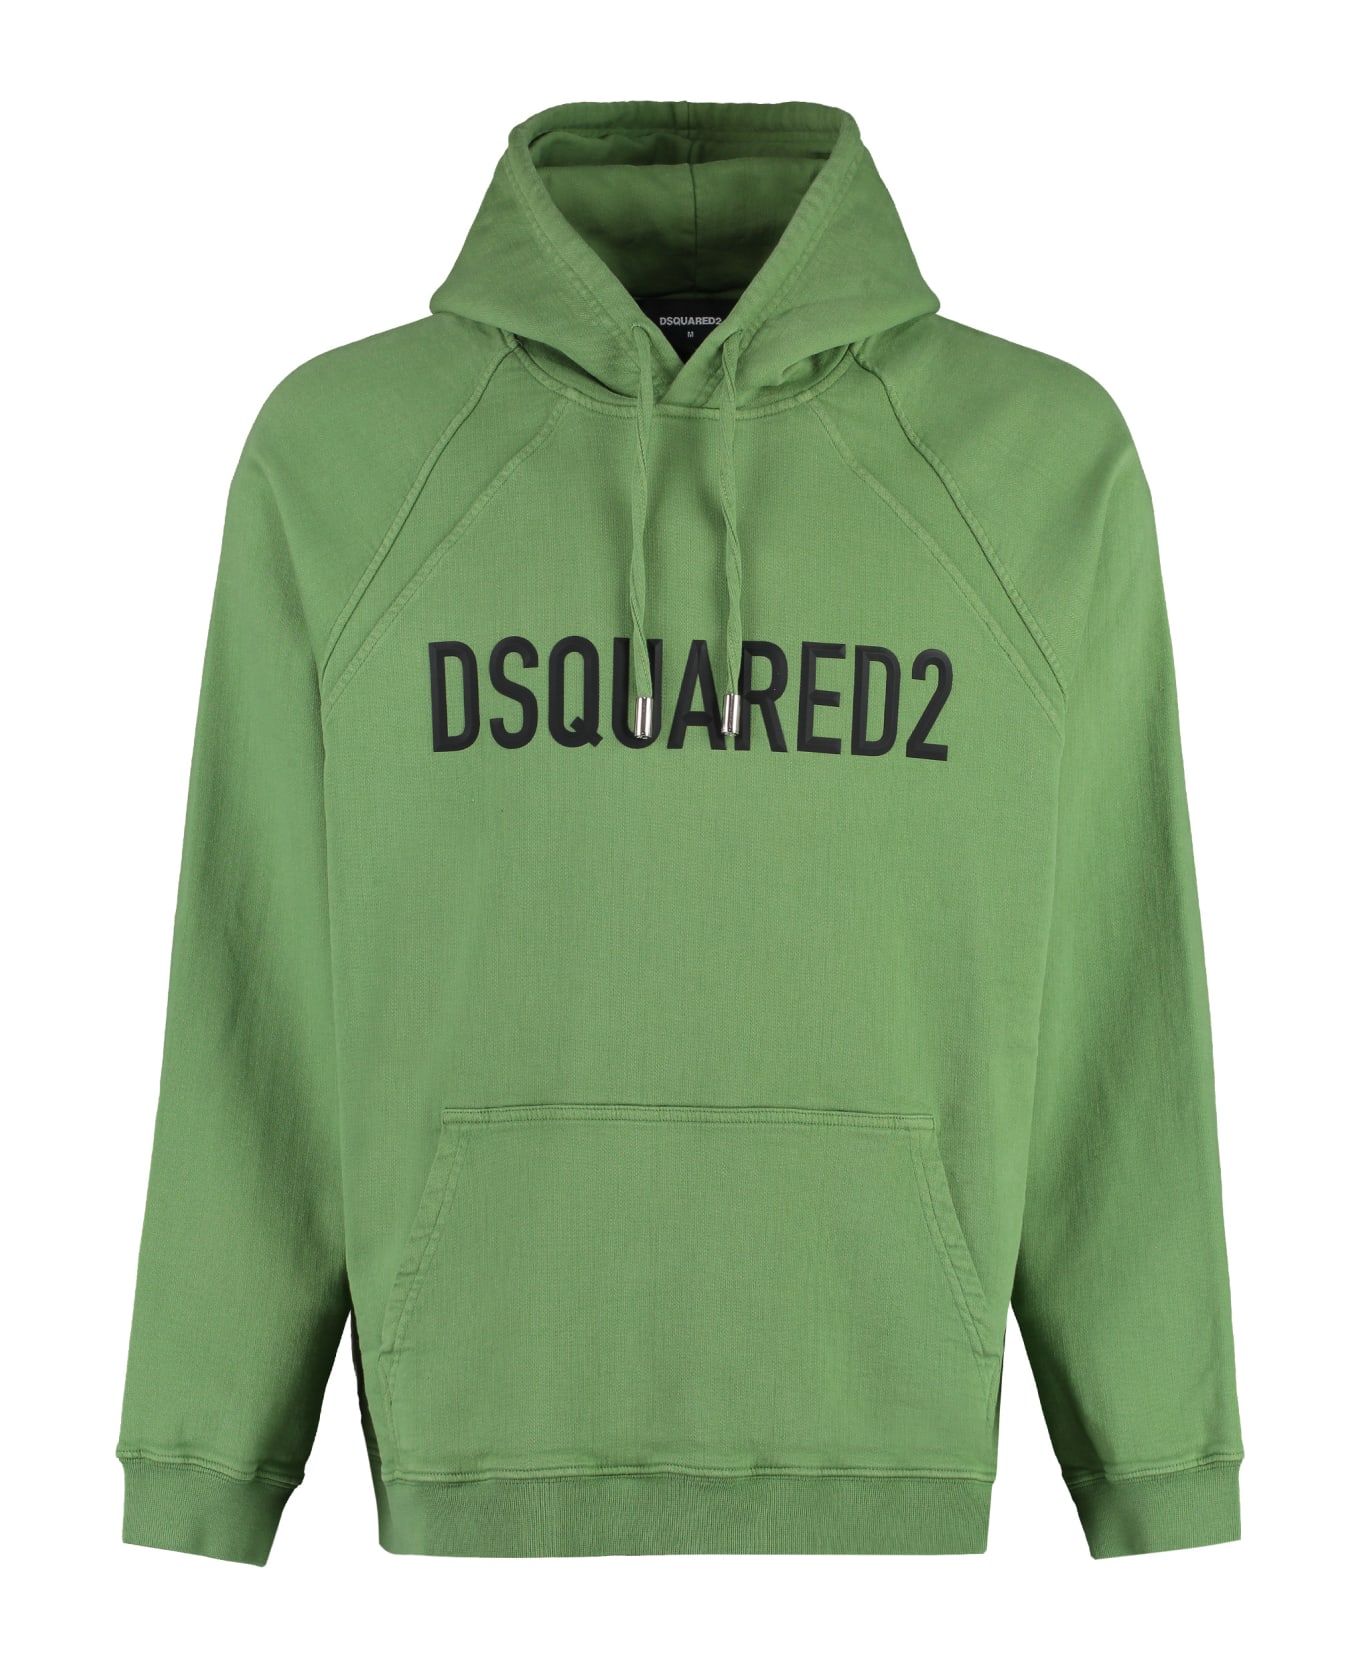 Dsquared2 Herca Cotton Hoodie - green